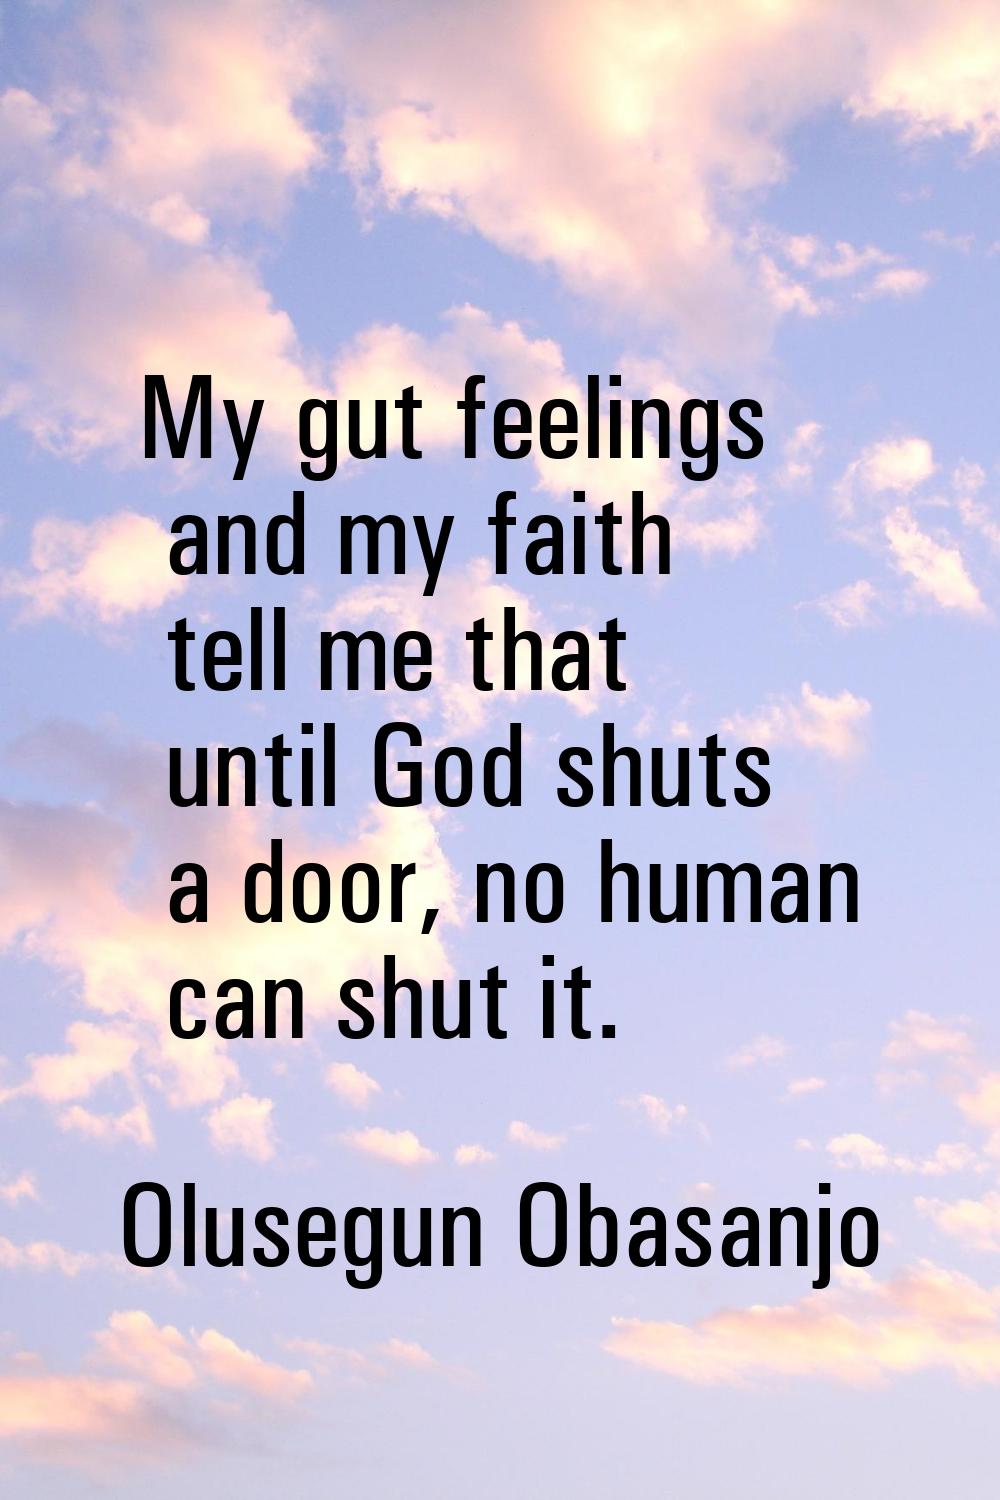 My gut feelings and my faith tell me that until God shuts a door, no human can shut it.